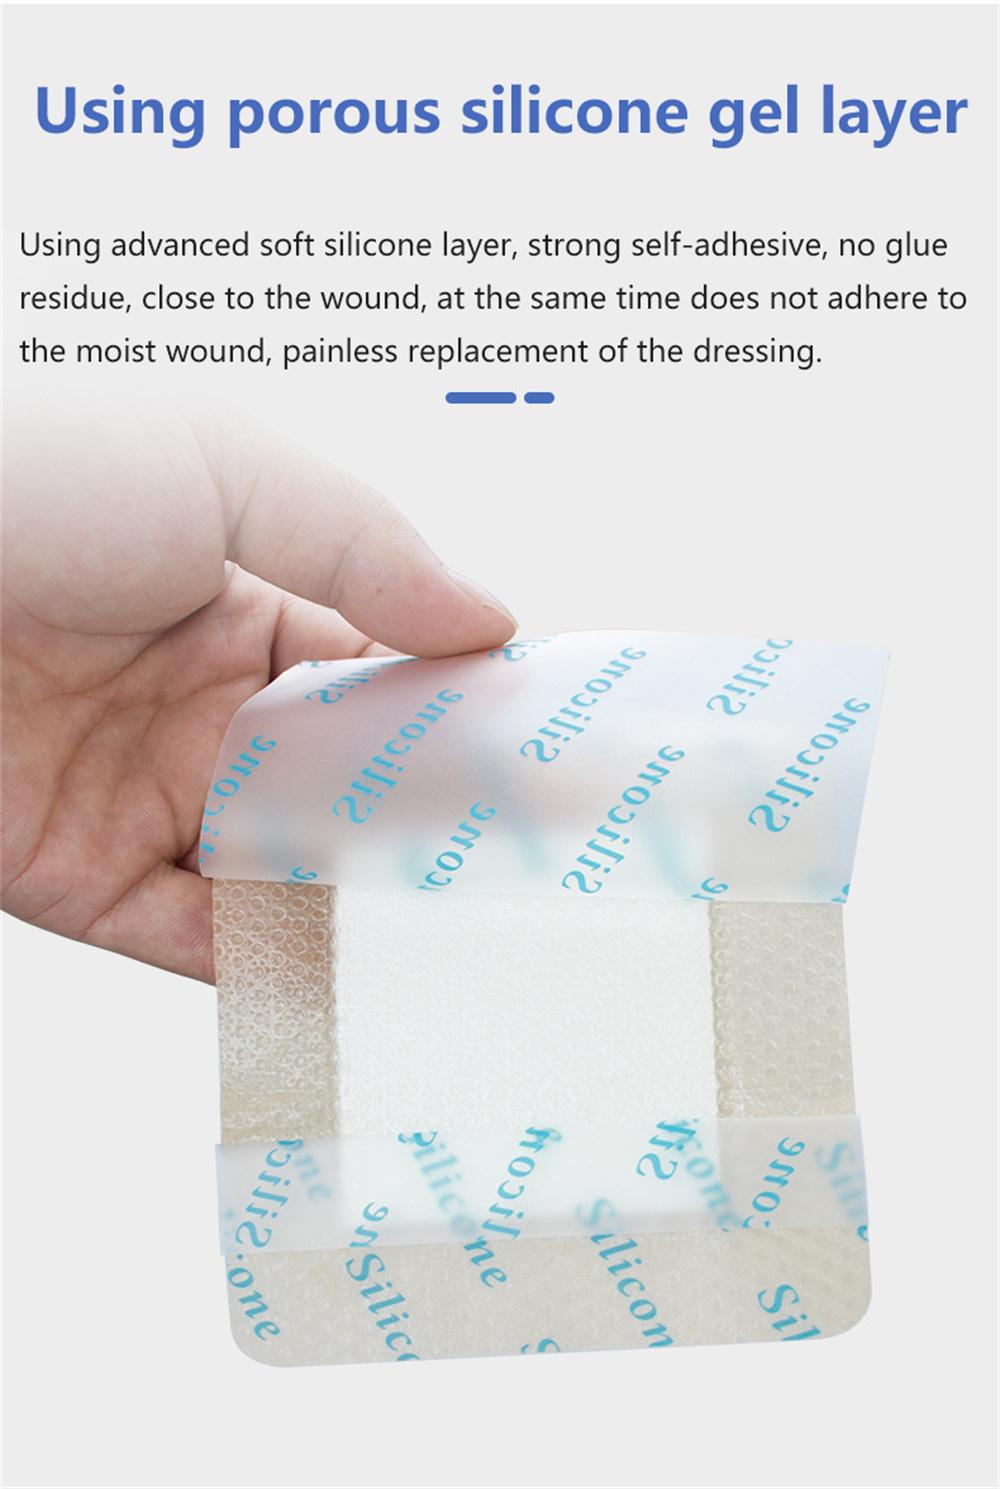 Antimicrobial Dressing Foam Dressing Best Selling Sterile Wound Care for Wound Care